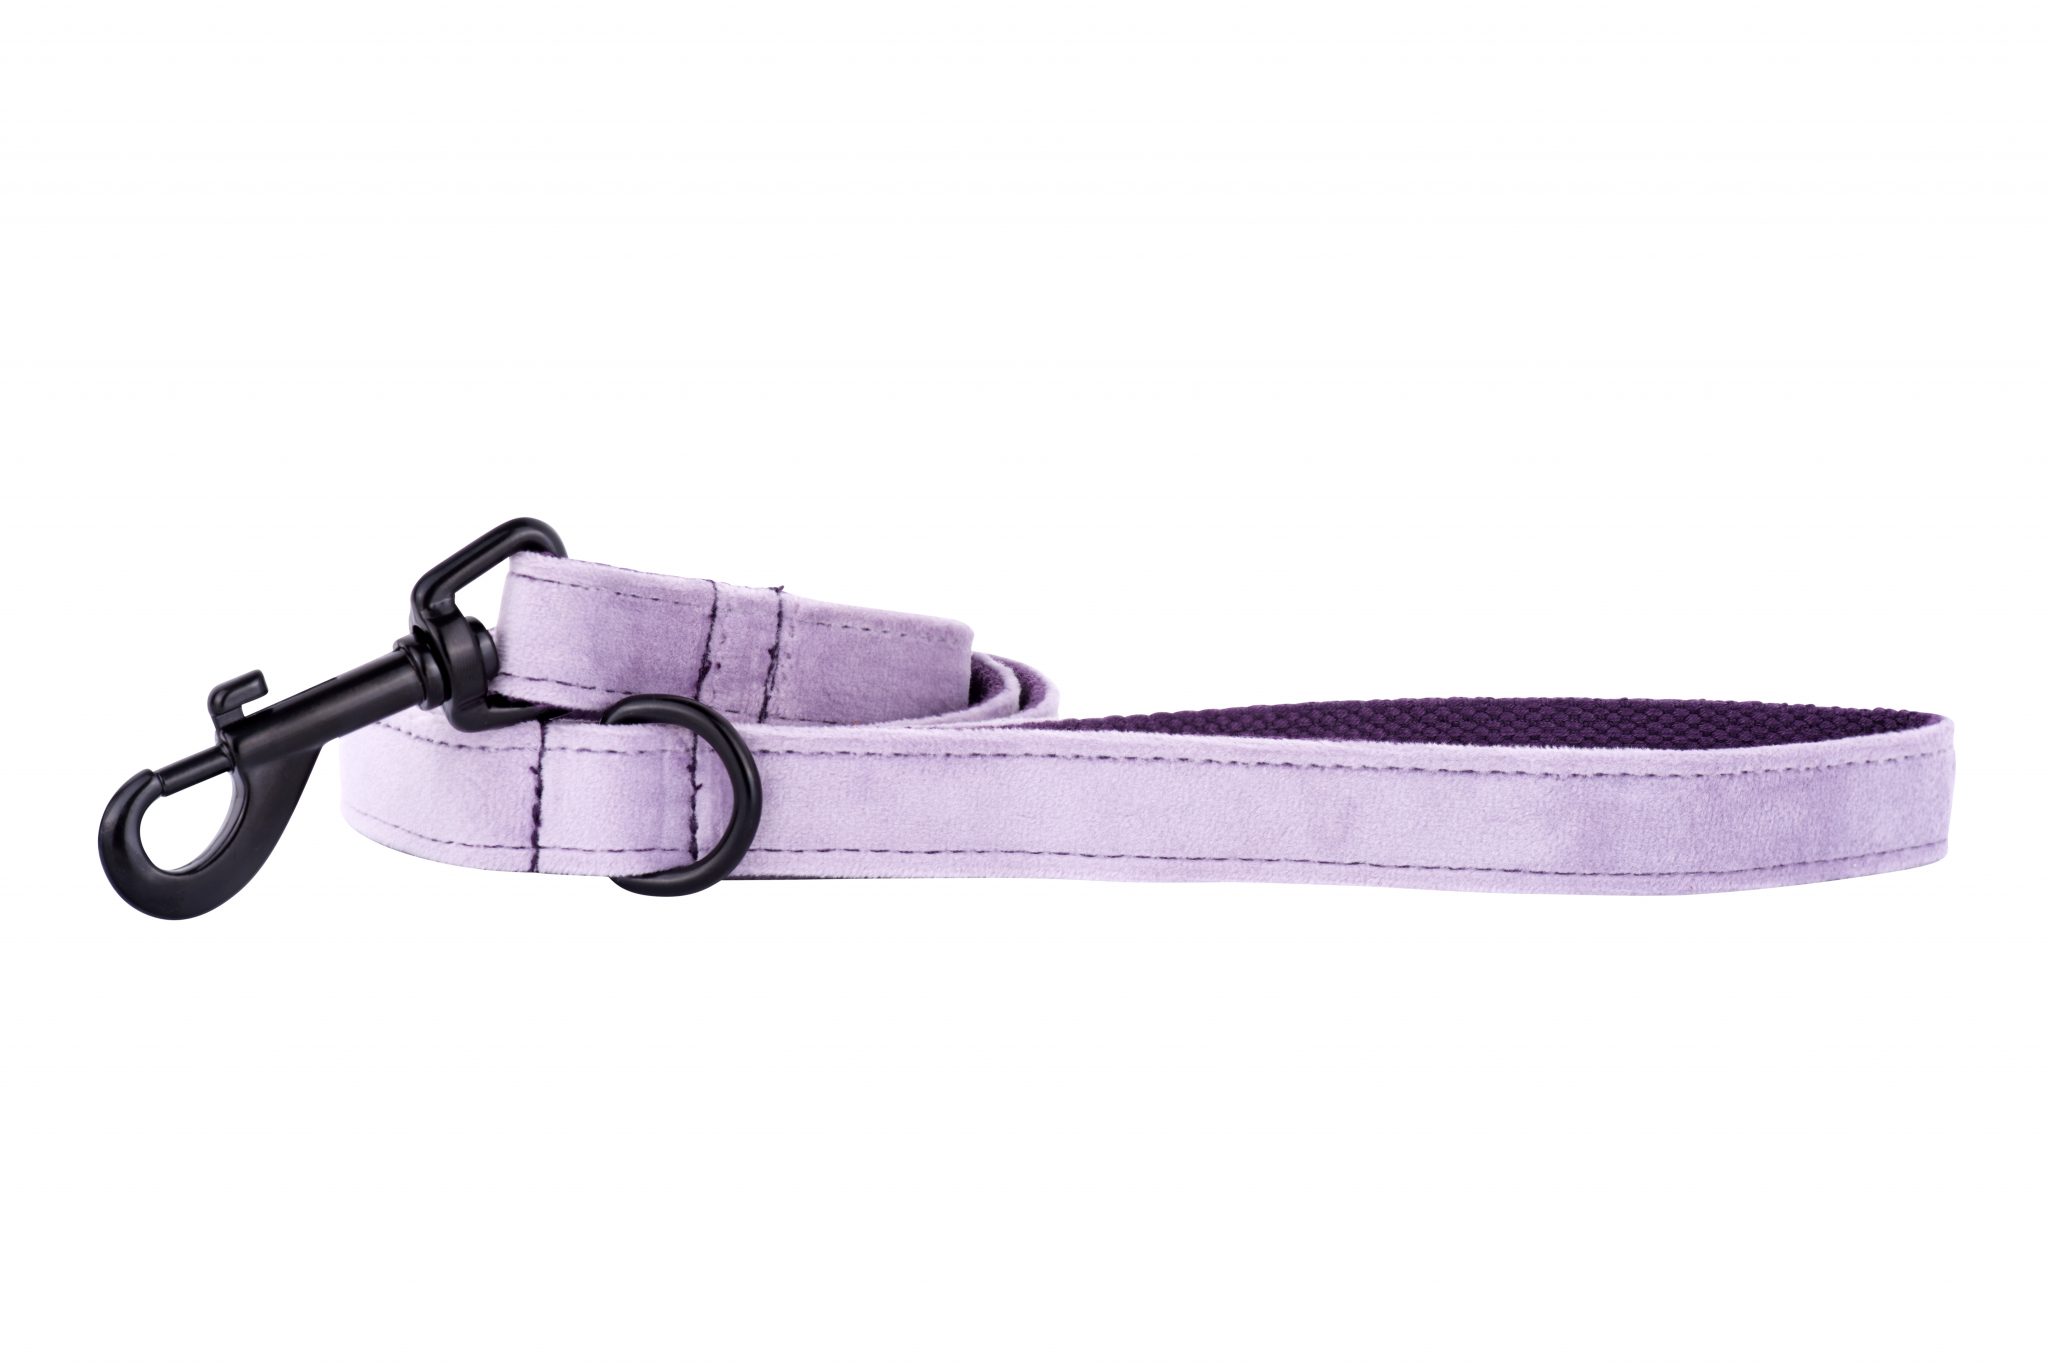 Lavender designer dog lead by IWOOF with black fittings